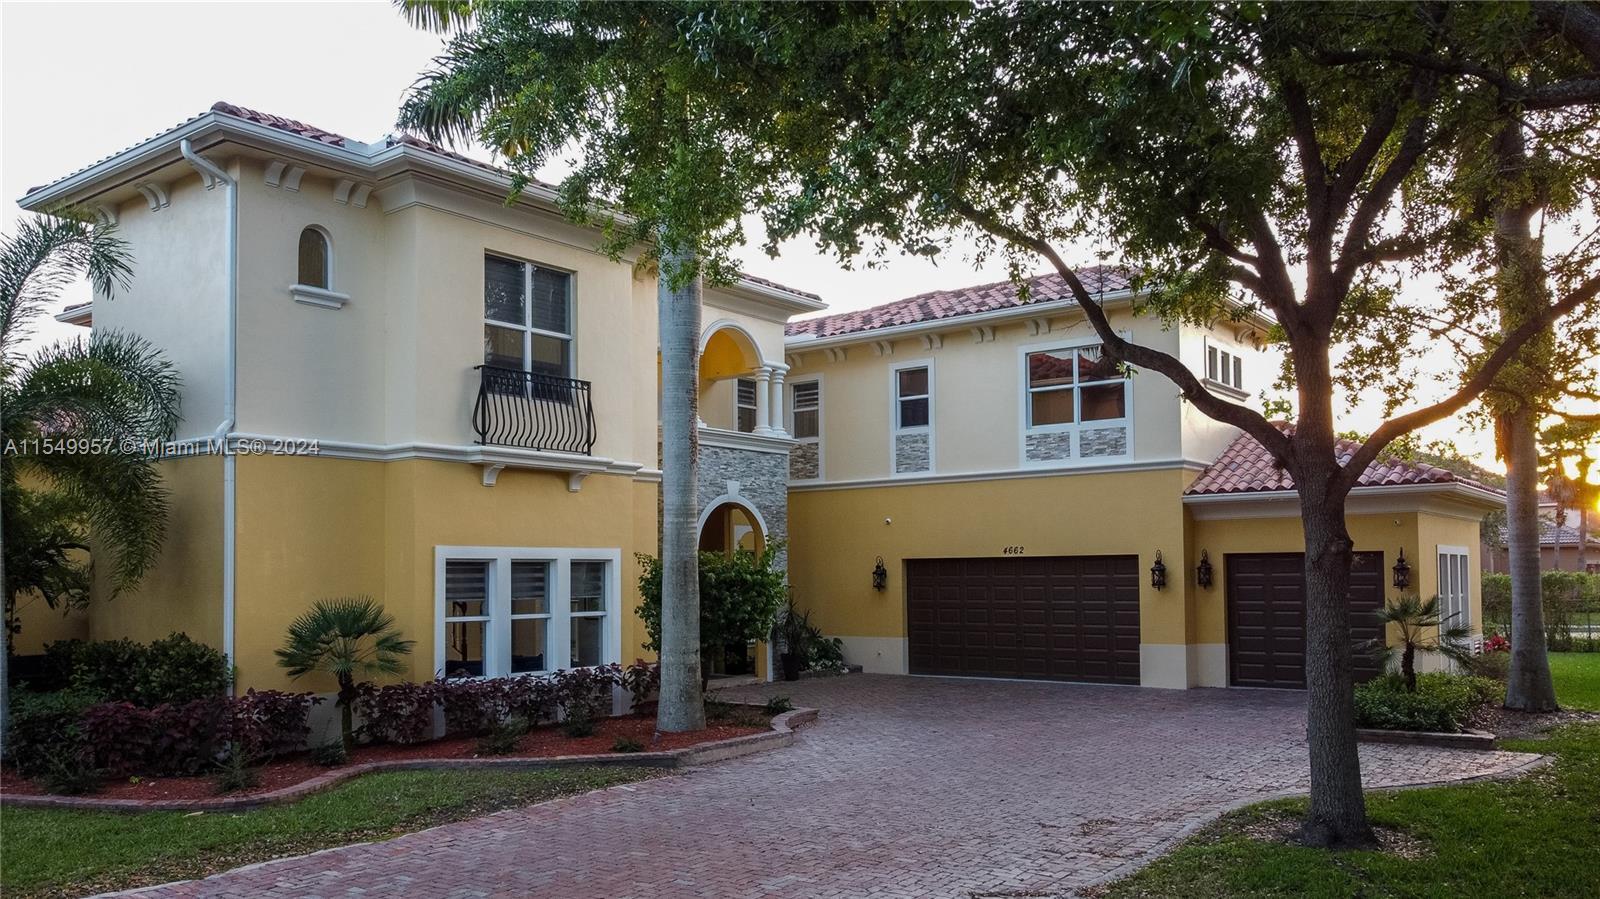 Stunning one of a kind estate located in Coconut Creek’s most tranquil and desirable community Rainf